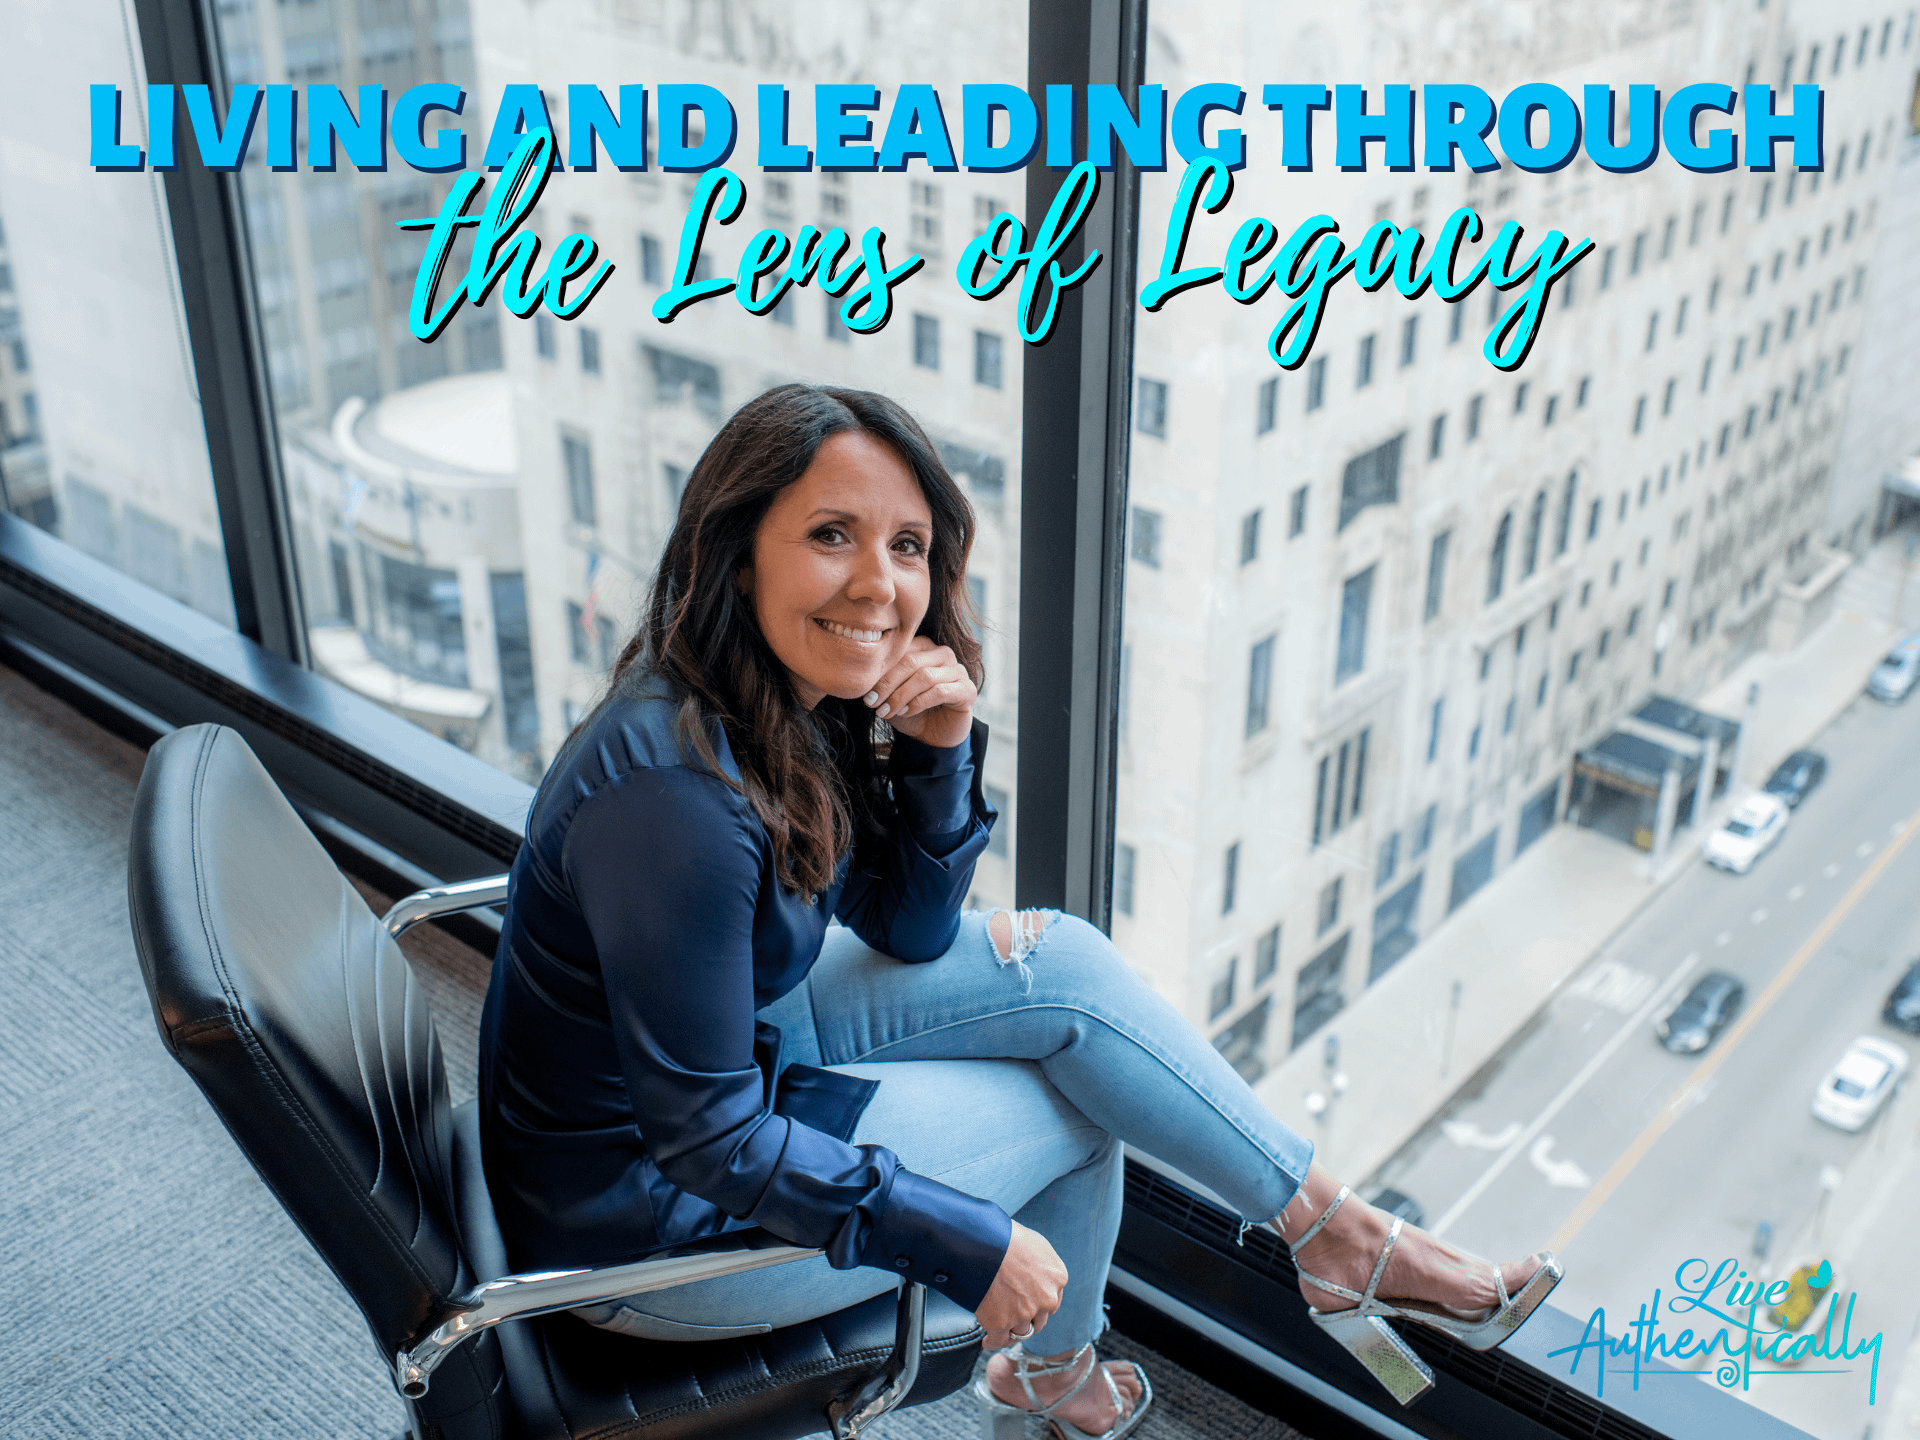 LA 9-7 Living and Leading through the Lens of Legacy